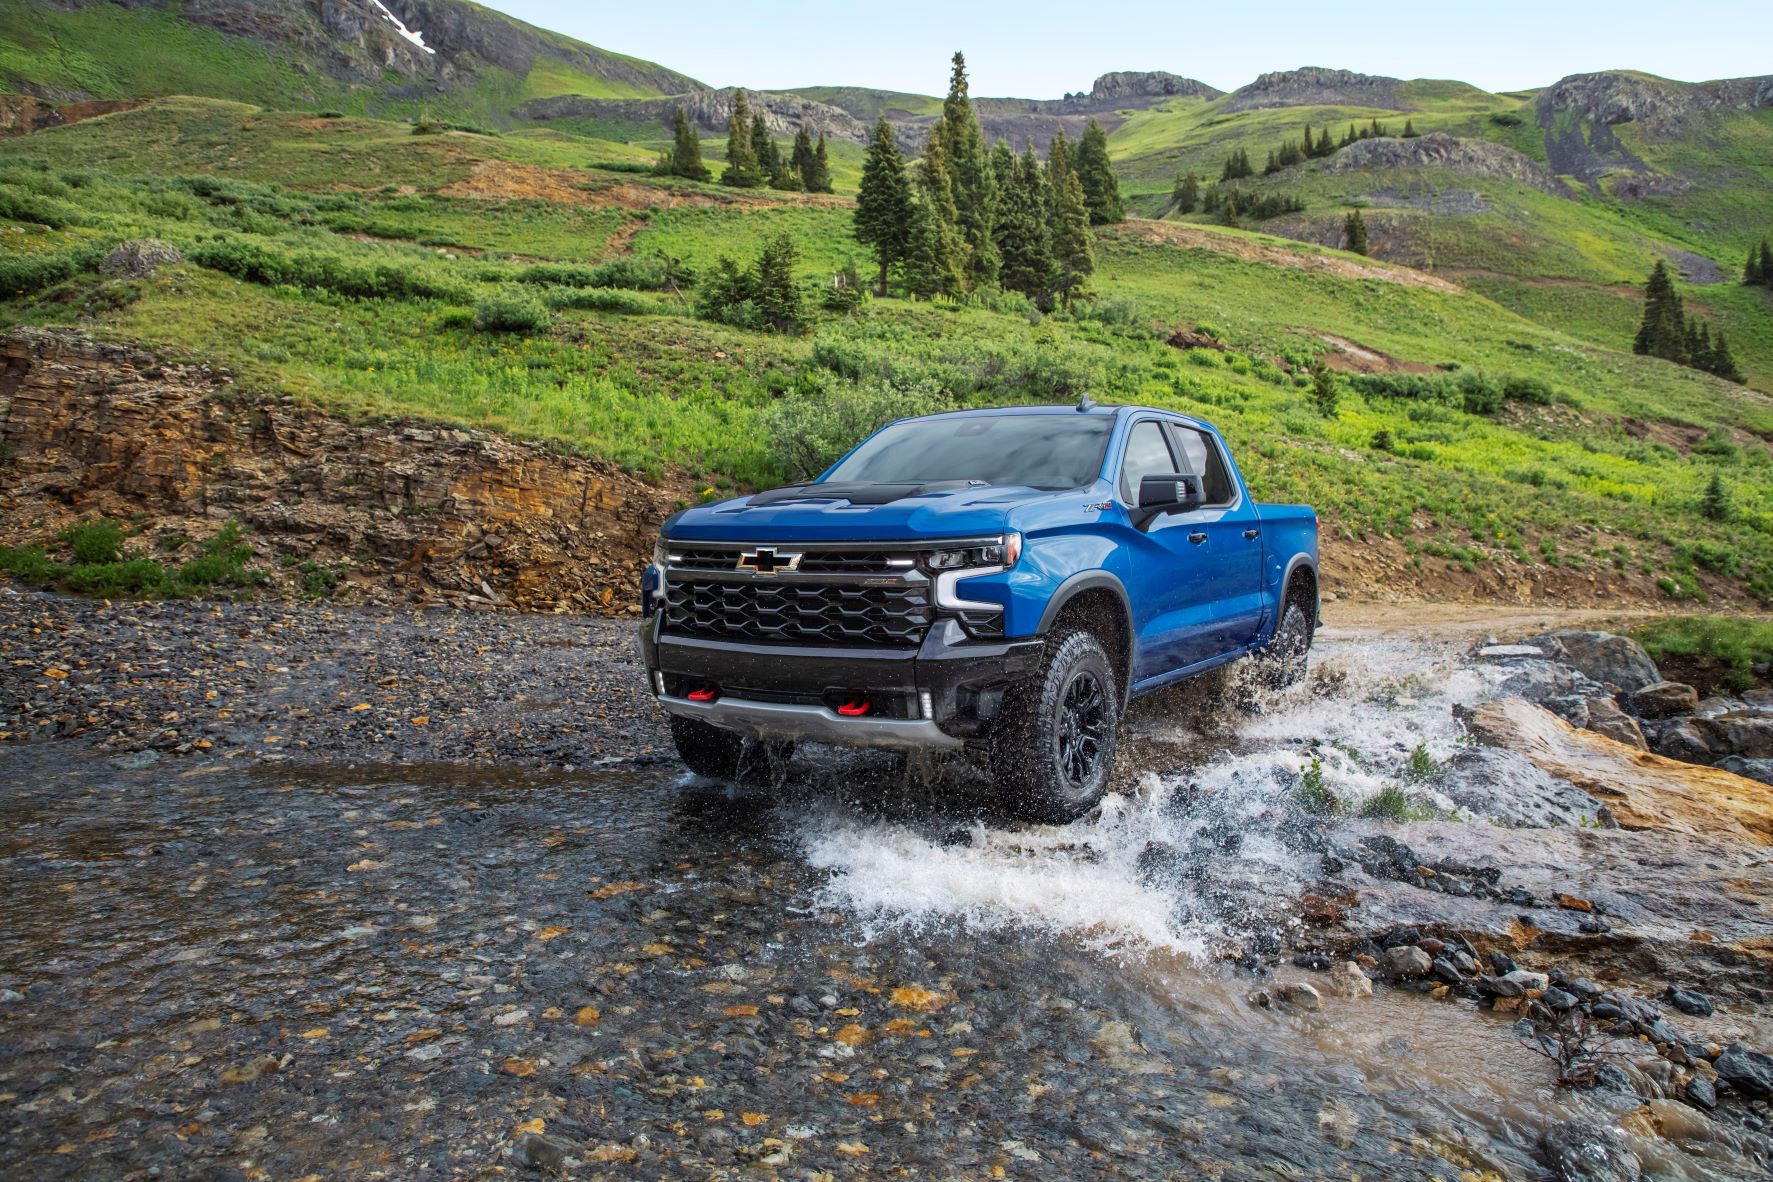 A blue 2022 Chevrolet Silverado ZR2 parked in the shallow moving water of a river. Behind the truck are low, rocky, hills spotted with grass and clusters of evergreen trees.